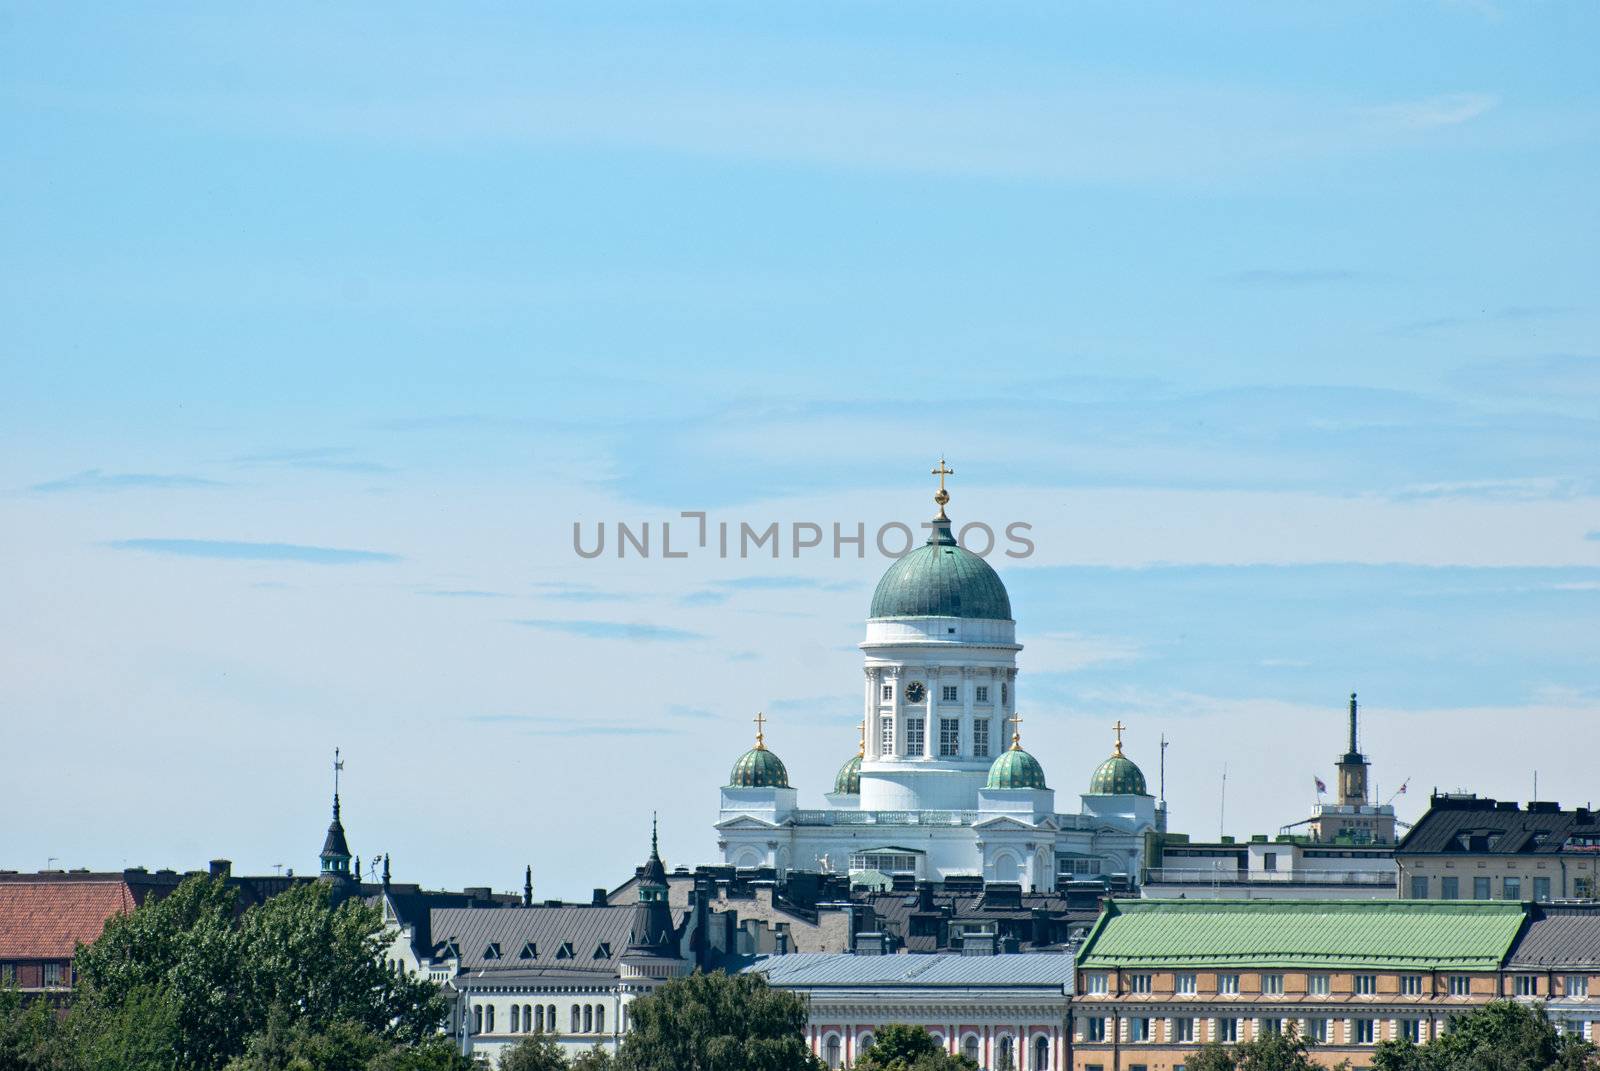 Helsinki. Finland. Nice view of the city.